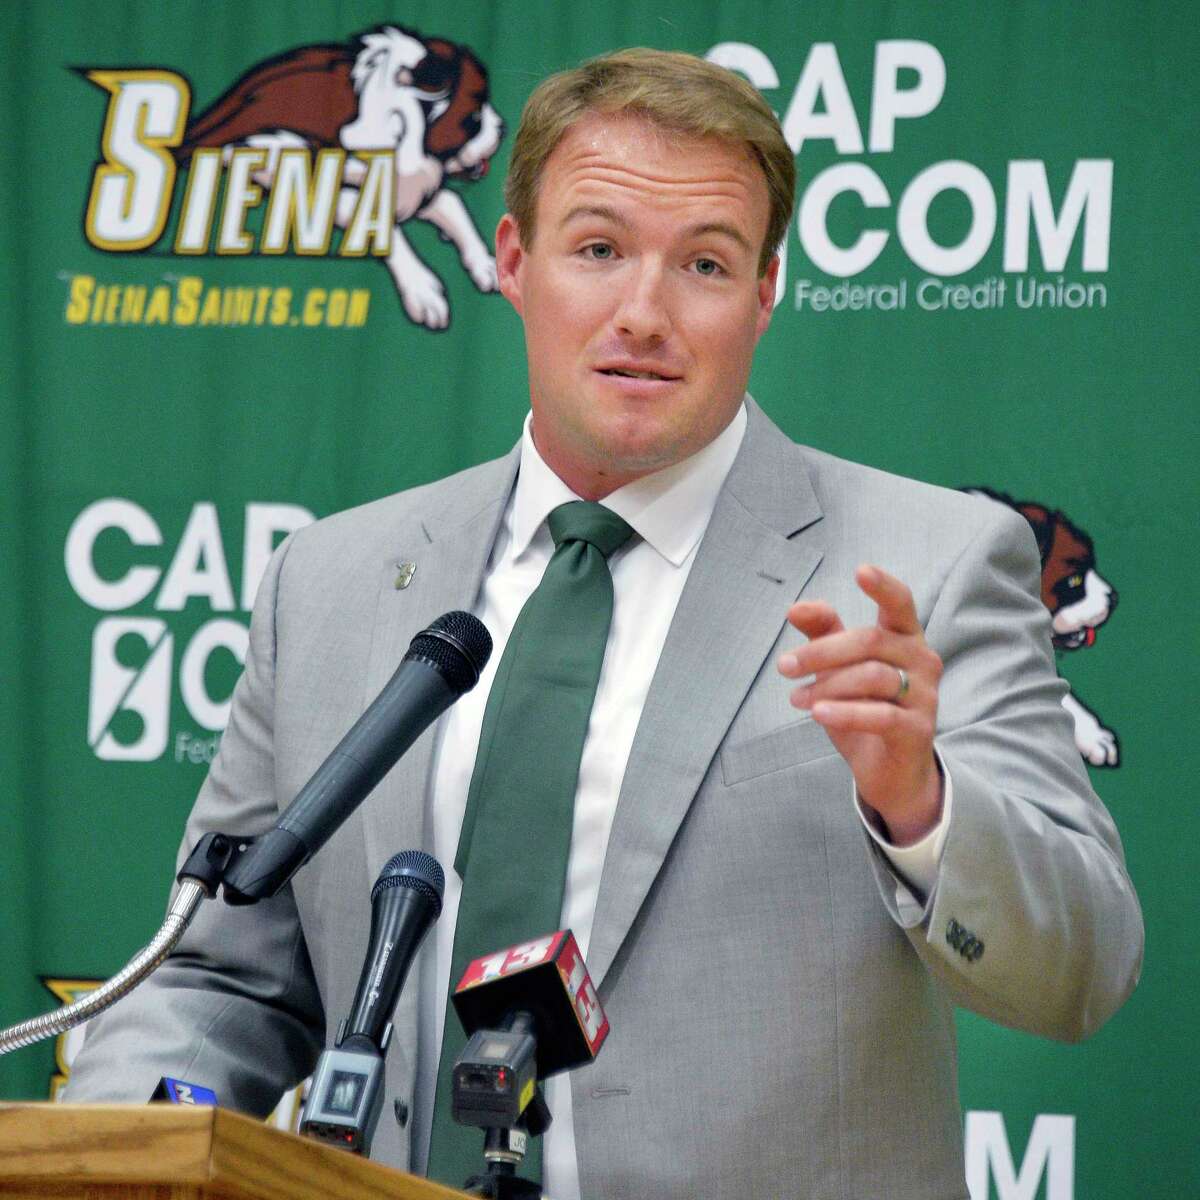 Siena men’s lacrosse's new coach Liam Gleason answers questions during a news conference Thursday June 28, 2018 in Colonie, NY. (John Carl D'Annibale/Times Union)